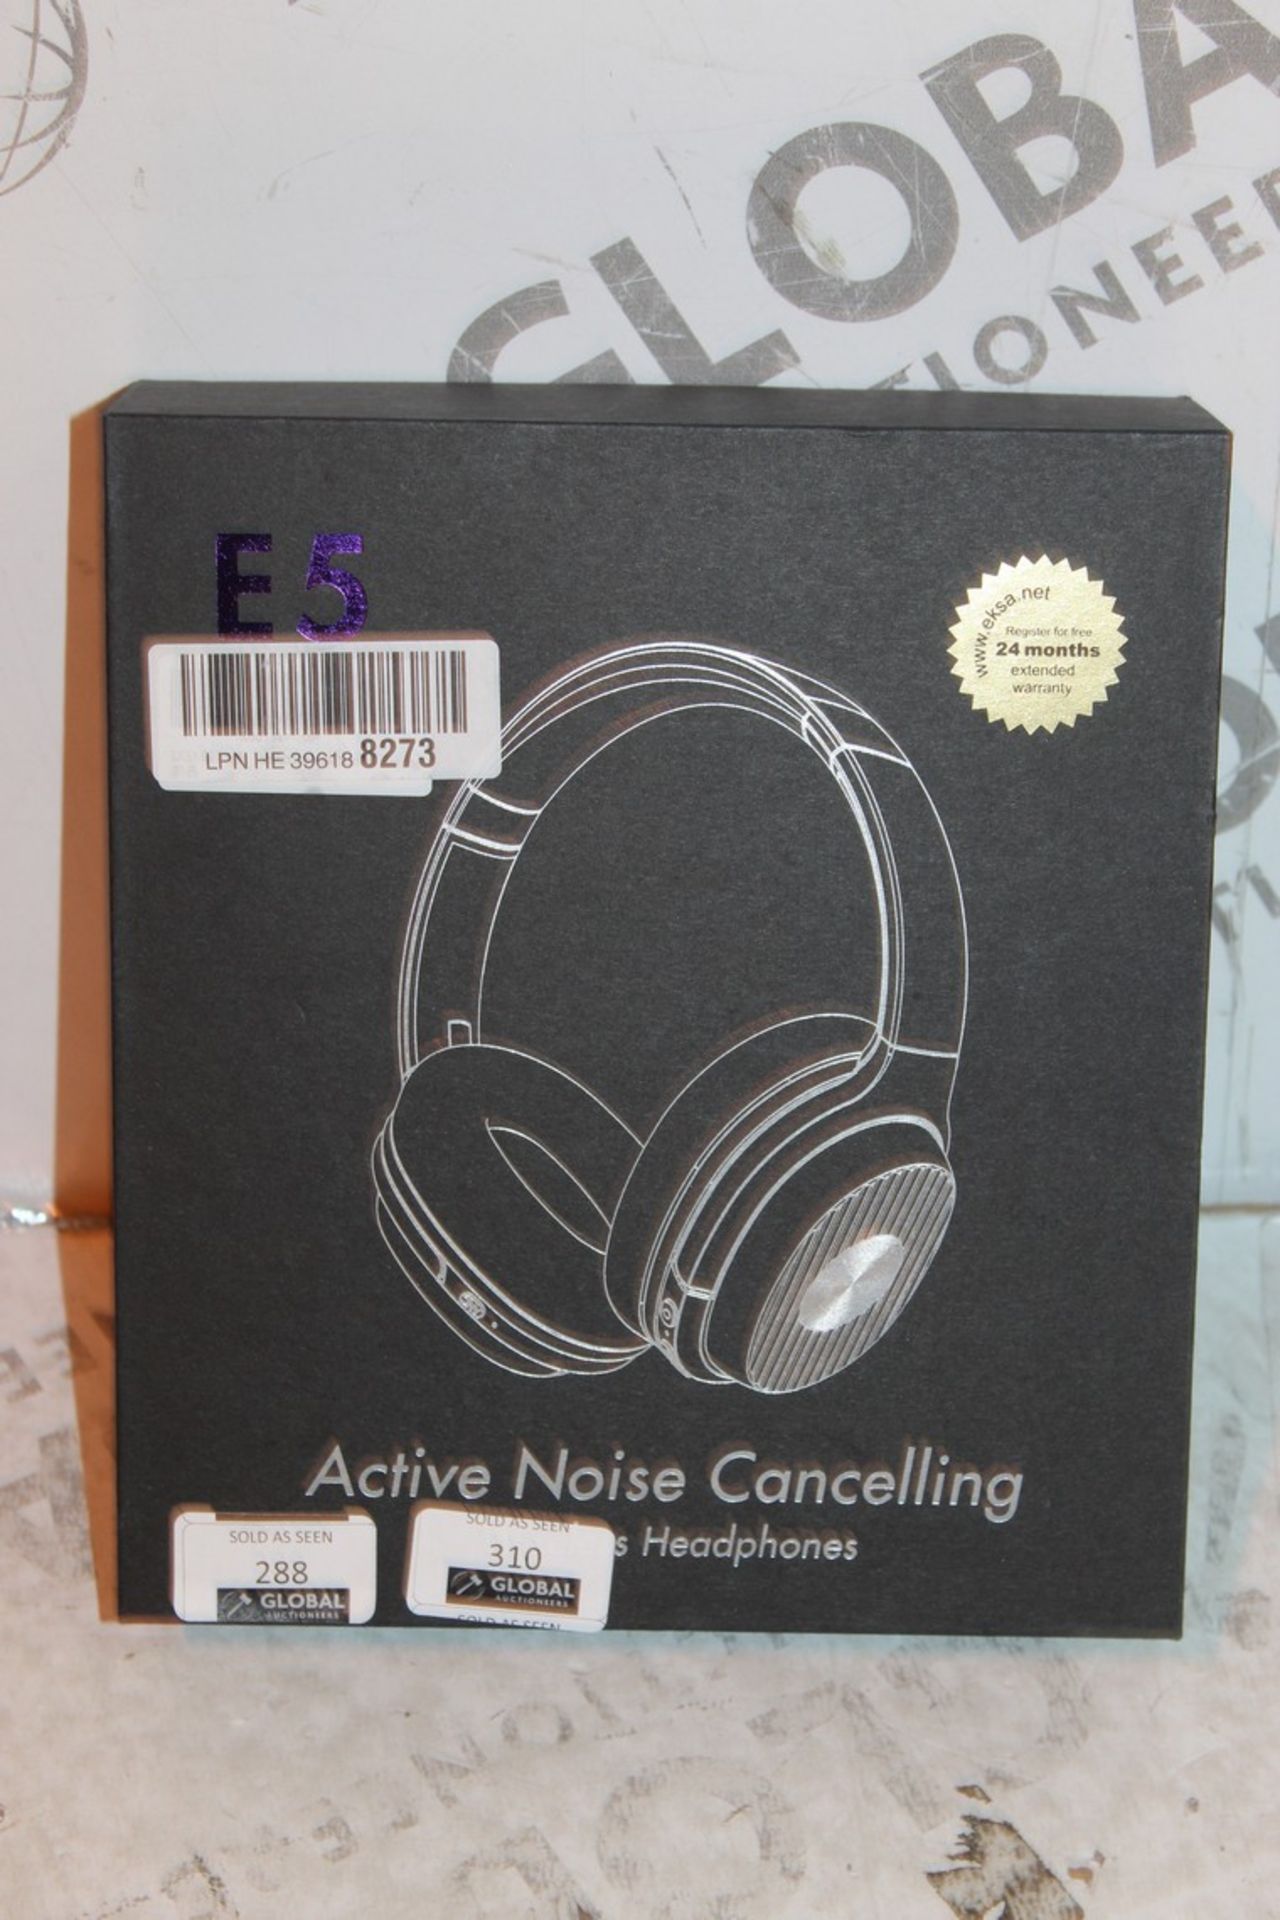 Boxed Pair E5 Active Noise Cancelling Wireless Headphones RRP £65 (Pictures Are For Illustration